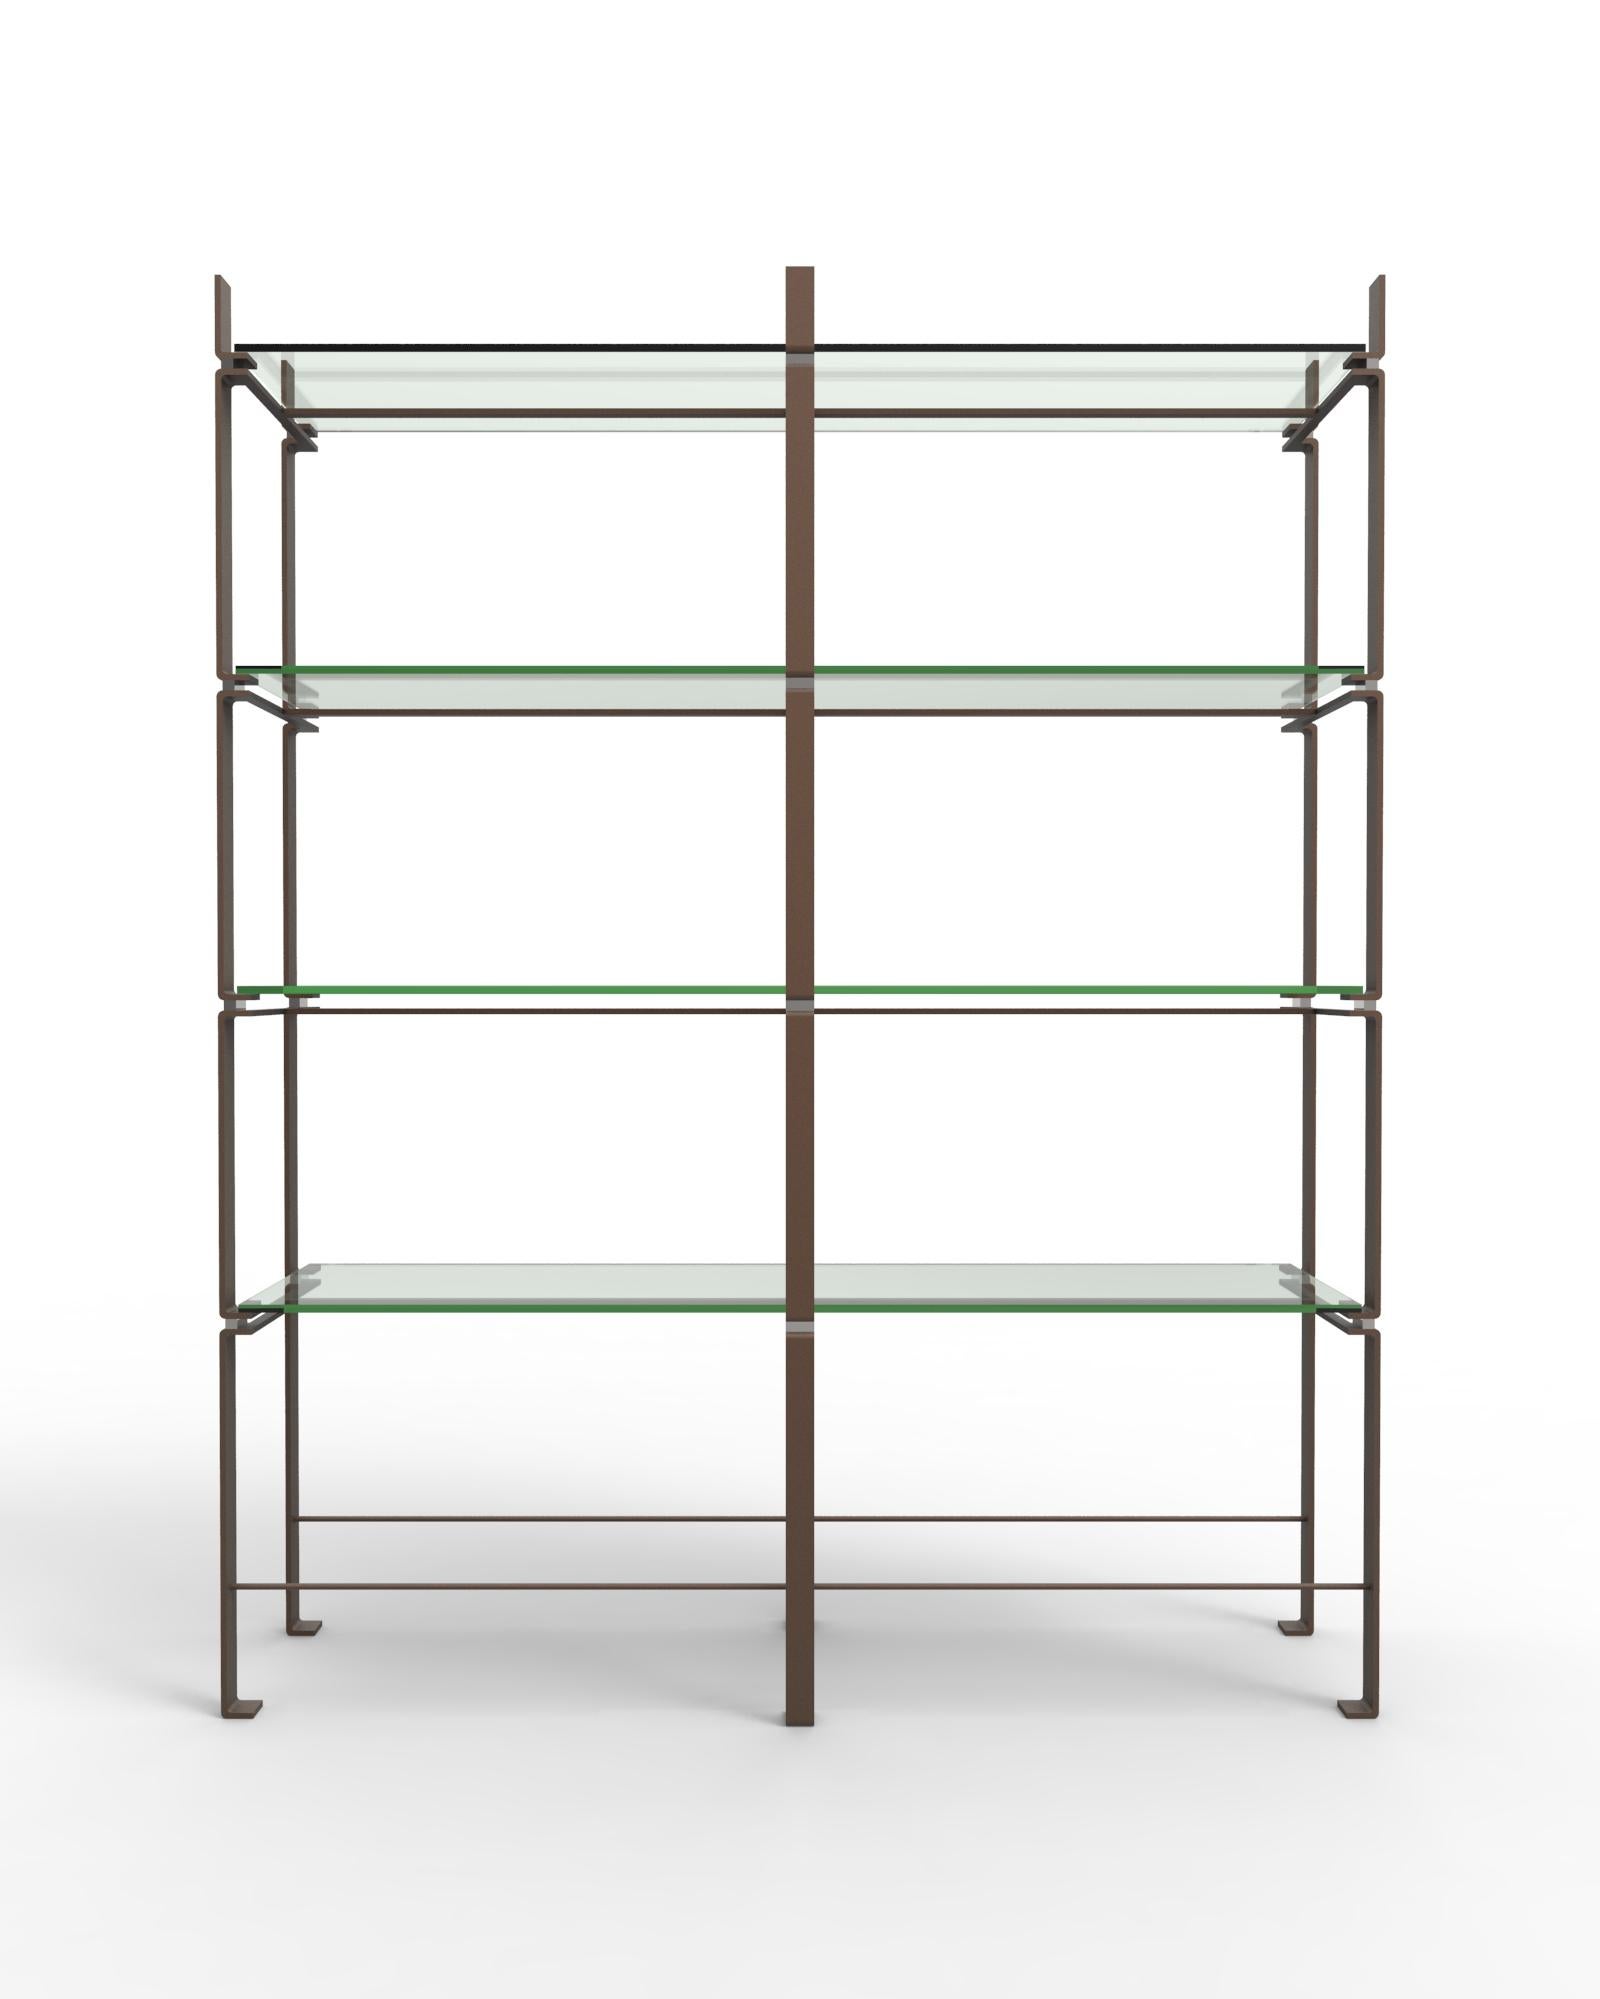 Double Etagere shelves by Gentner Design
Dimensions: D 35.5 x W 182 x H 238 cm
Materials: stainless steel, glass
Available in other sizes.

Visually delicate, the contrasting materials of polished stainless steel and glass give the pieces its